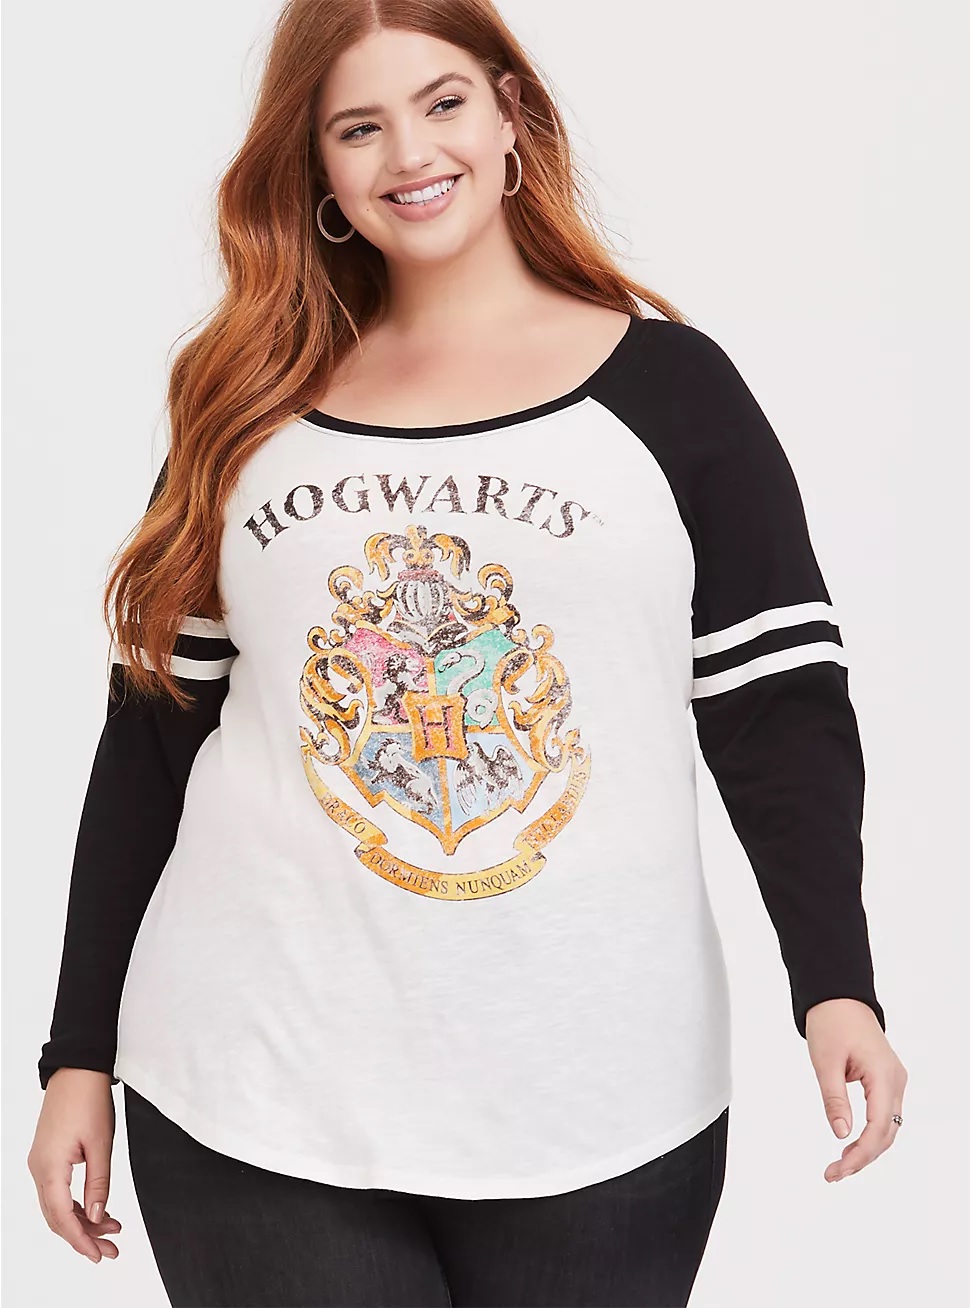 Torrid Just Released A Size-Inclusive Harry Potter 